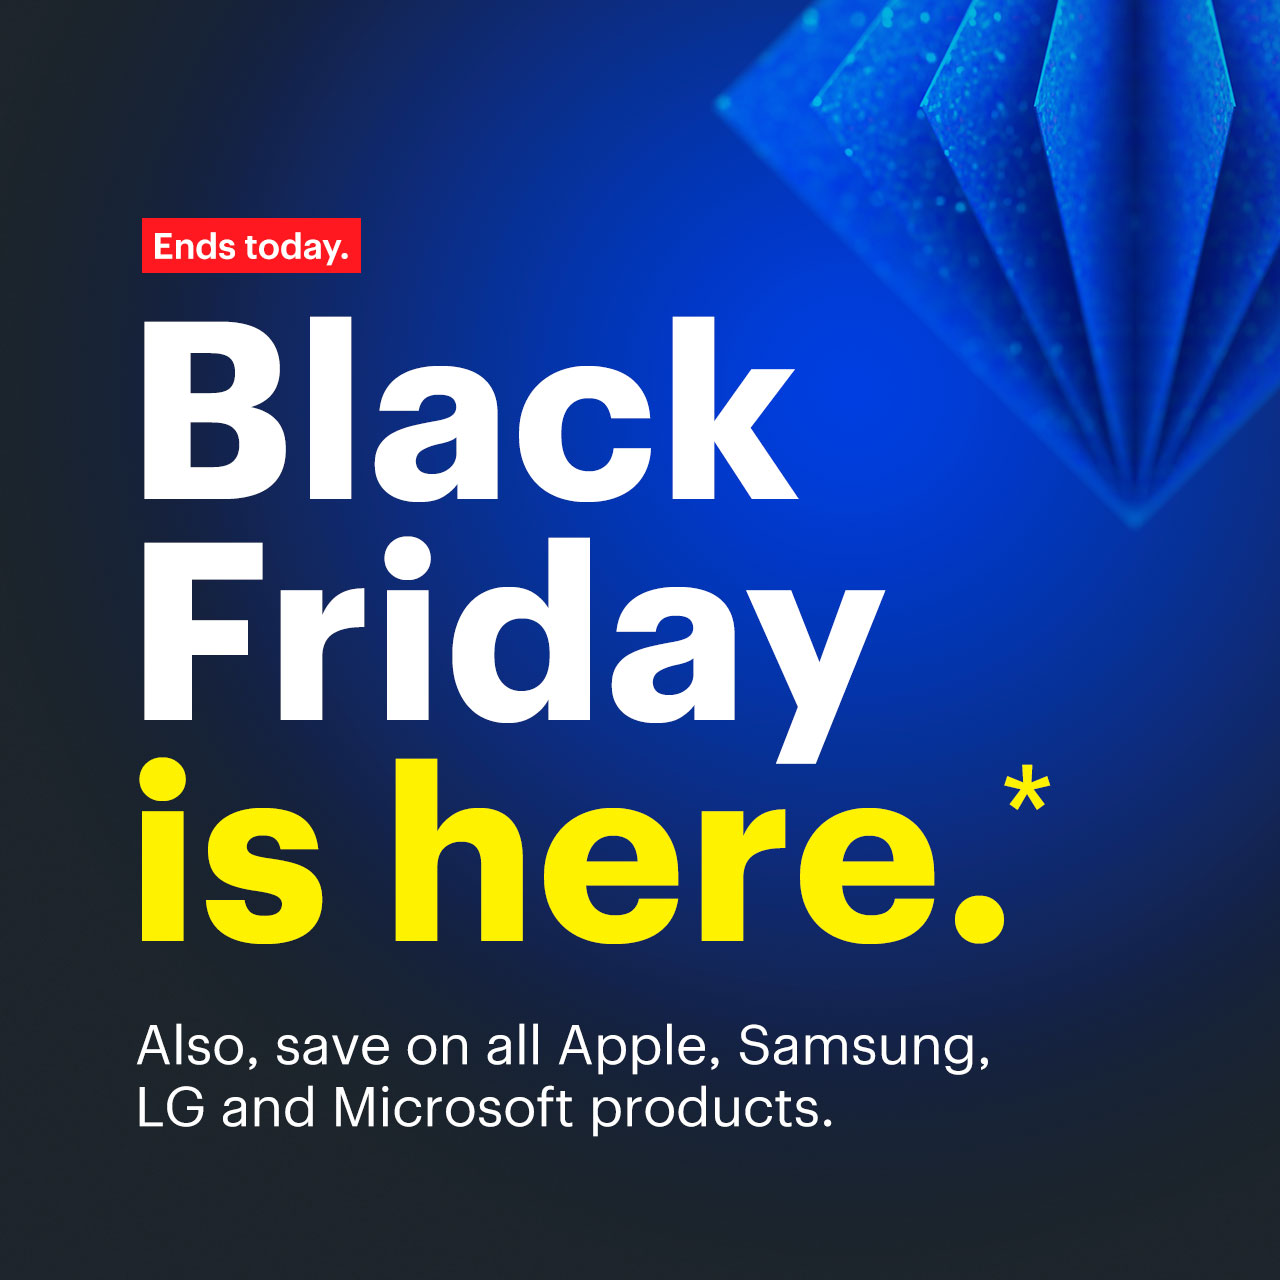 Black Friday is here. Ends today. Also, save on all Apple, Samsung, LG and Microsoft products. Reference disclaimer.